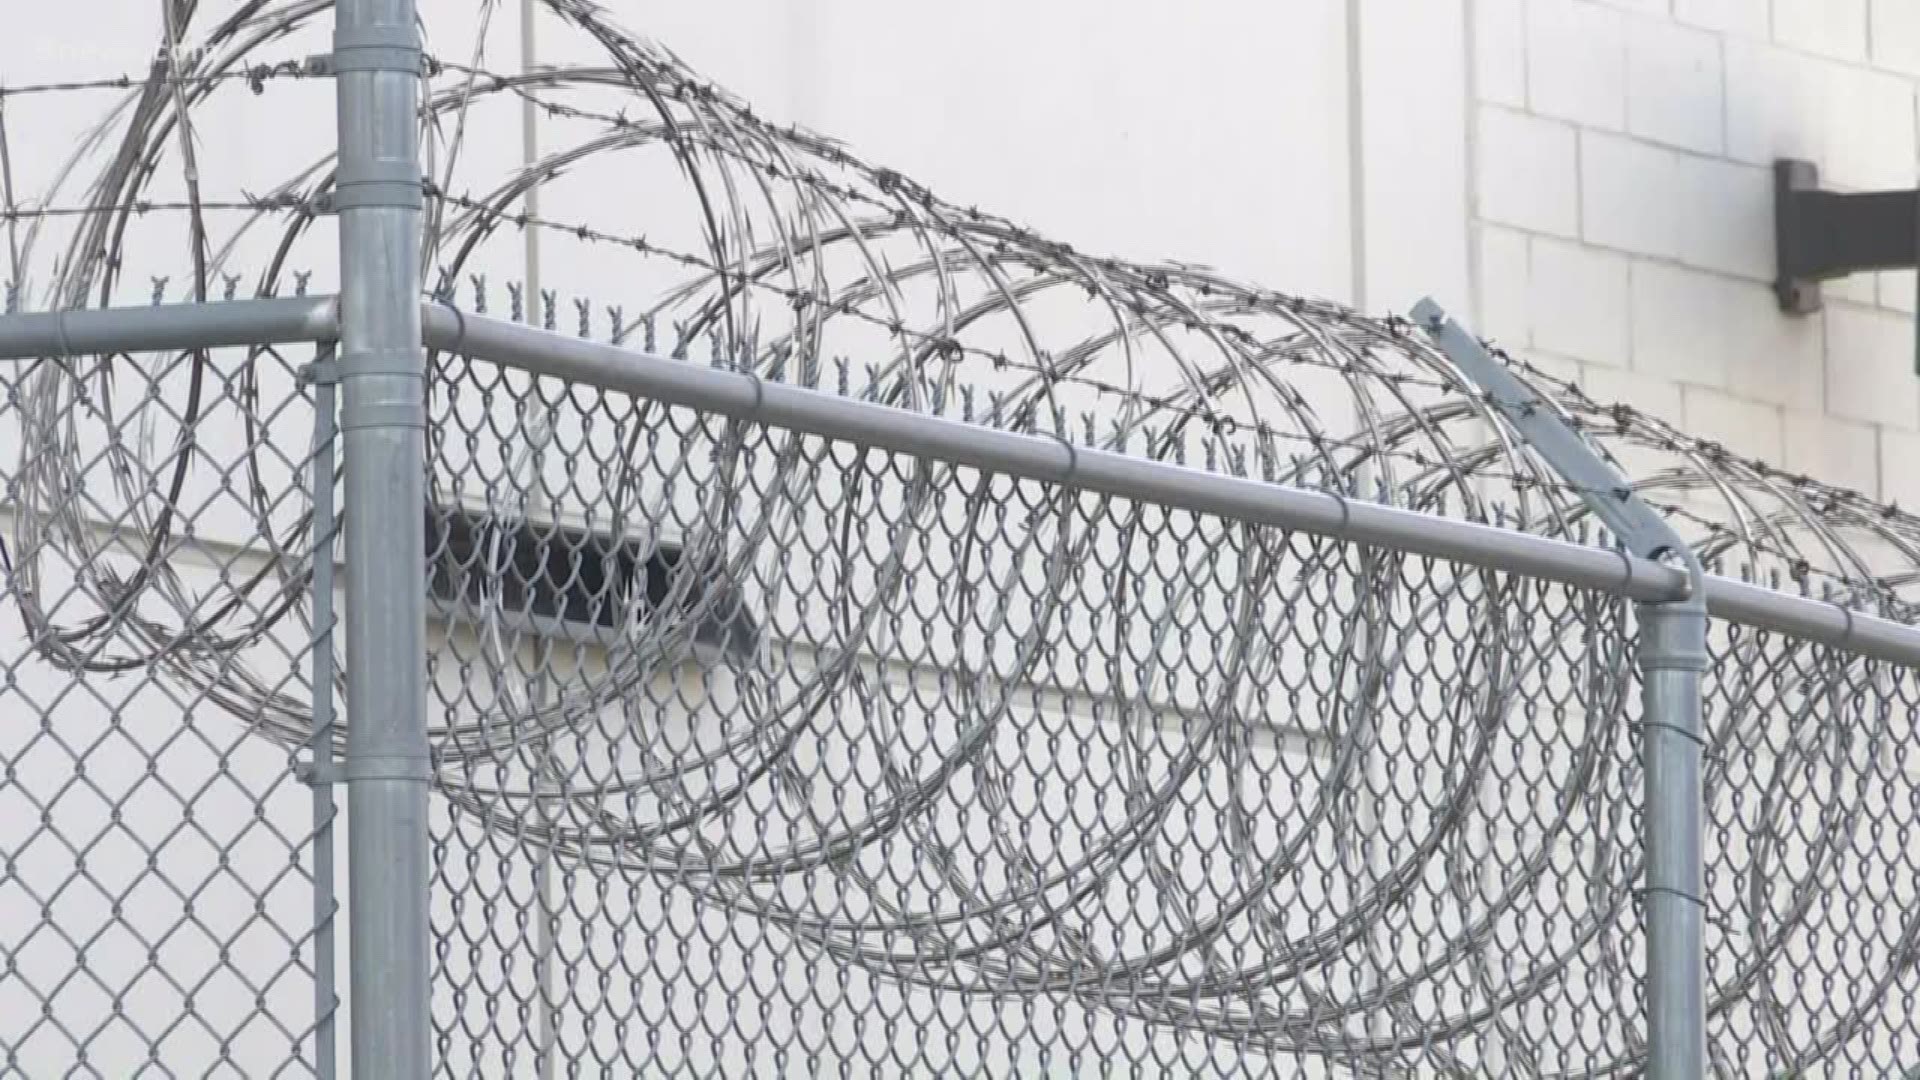 It's the first time inmates were released under the new policy enacted Jan. 1 due to a budget shortfall.